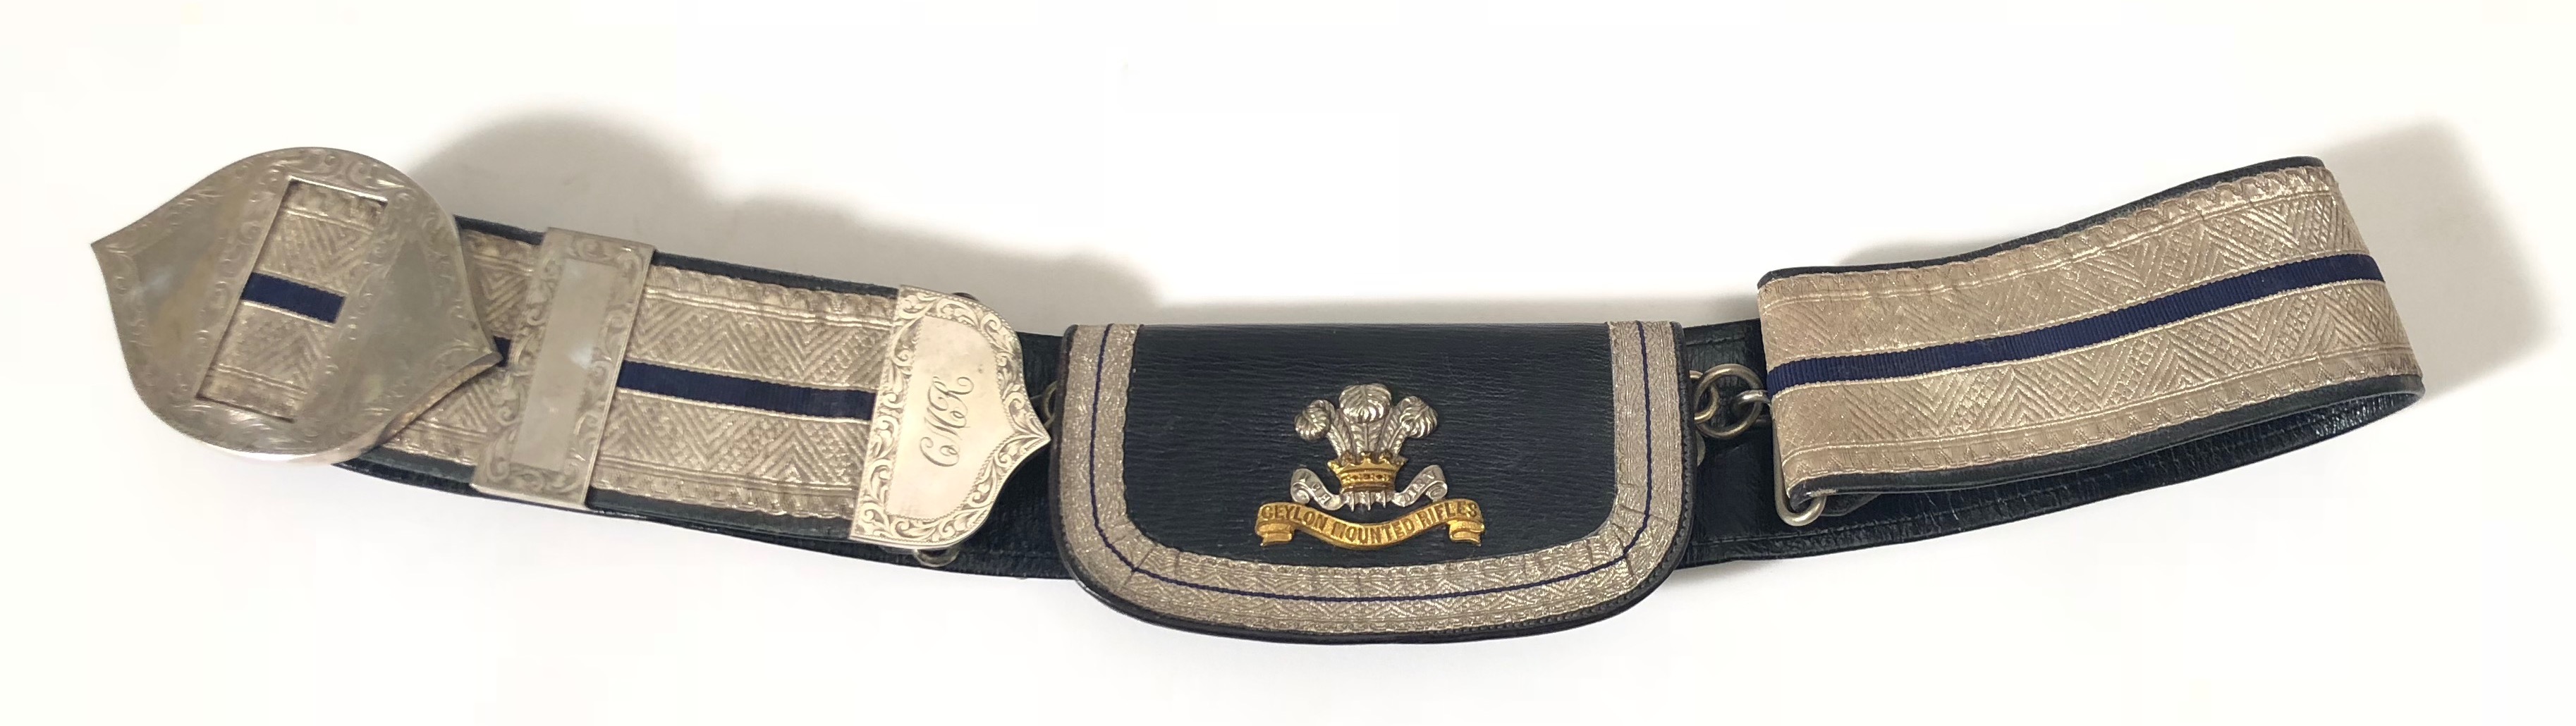 Ceylon Mounted Rifles Officer pouch belt and pouch.